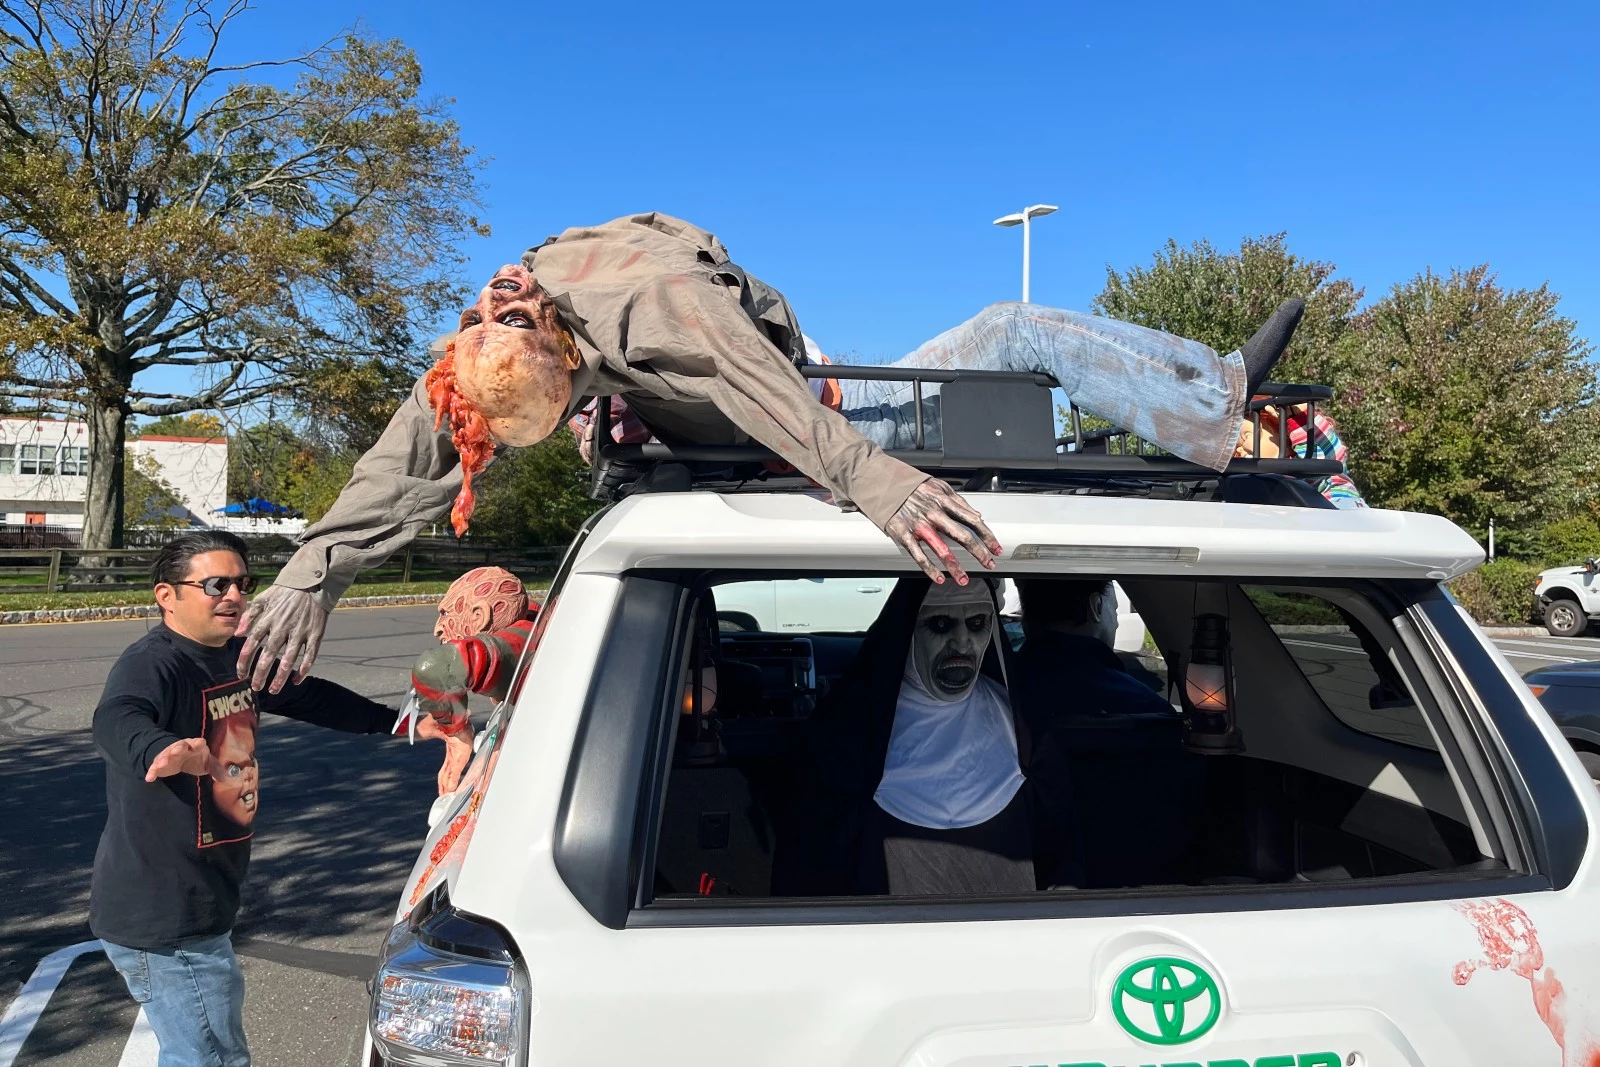 The creepiest Halloween car in NJ belongs to a guy from Somerset